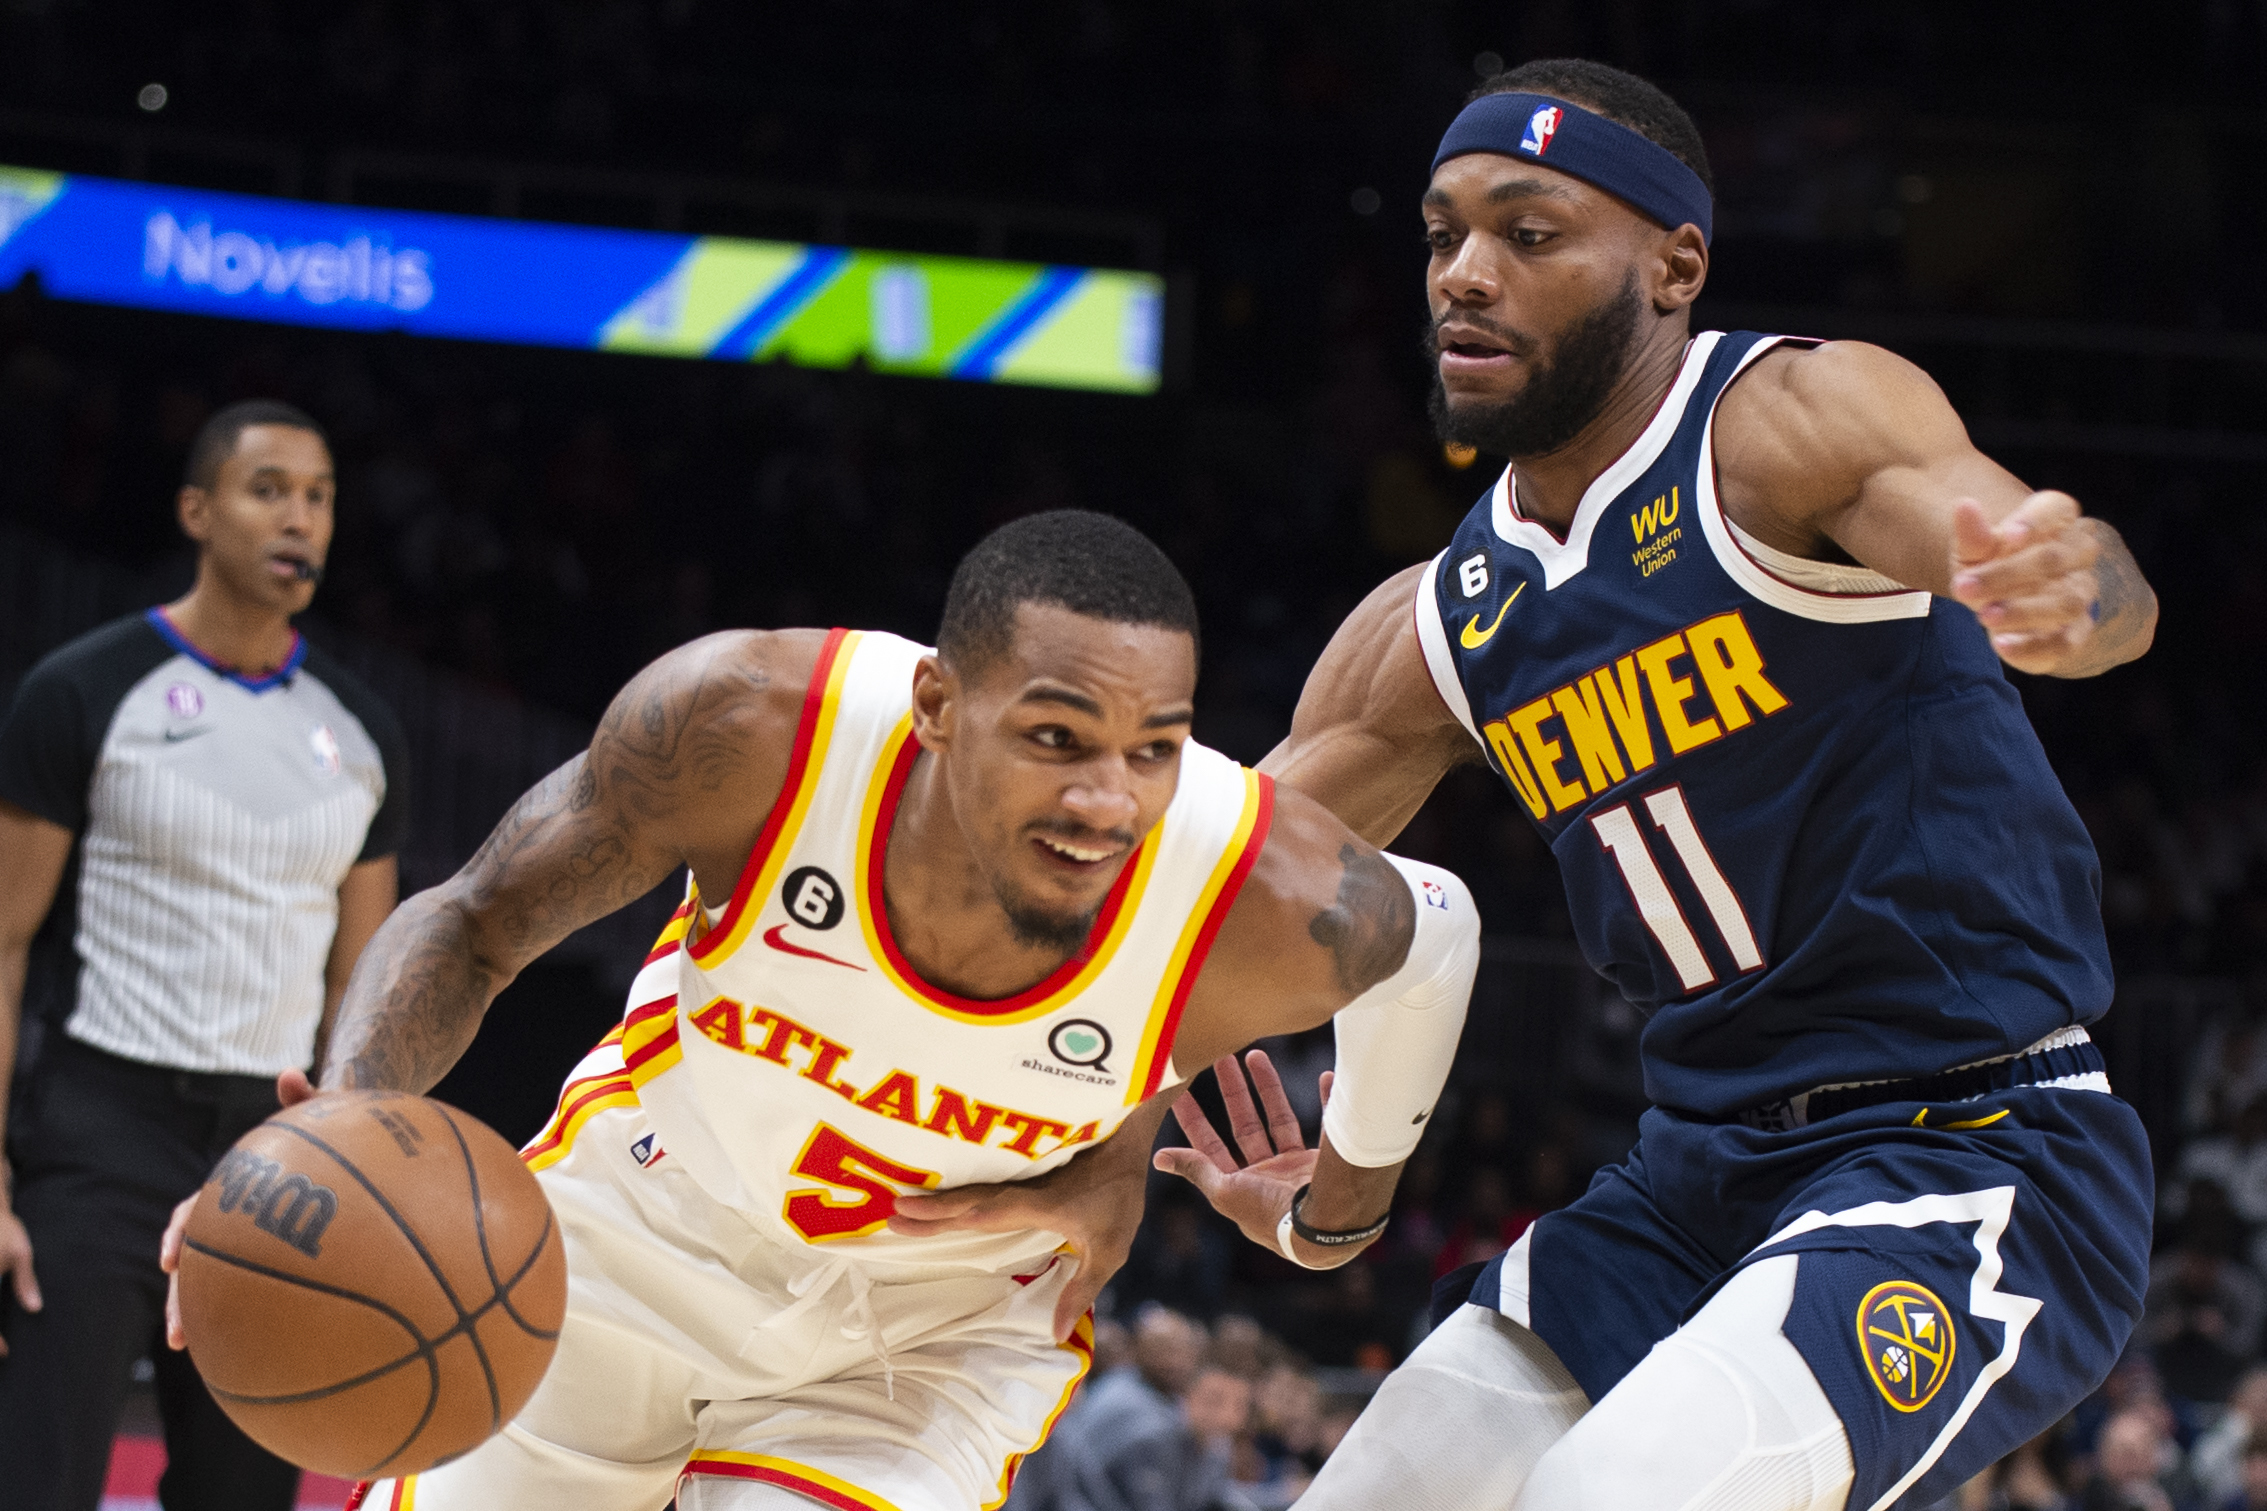 Hawks All-Star guard Dejounte Murray out multiple weeks with ankle